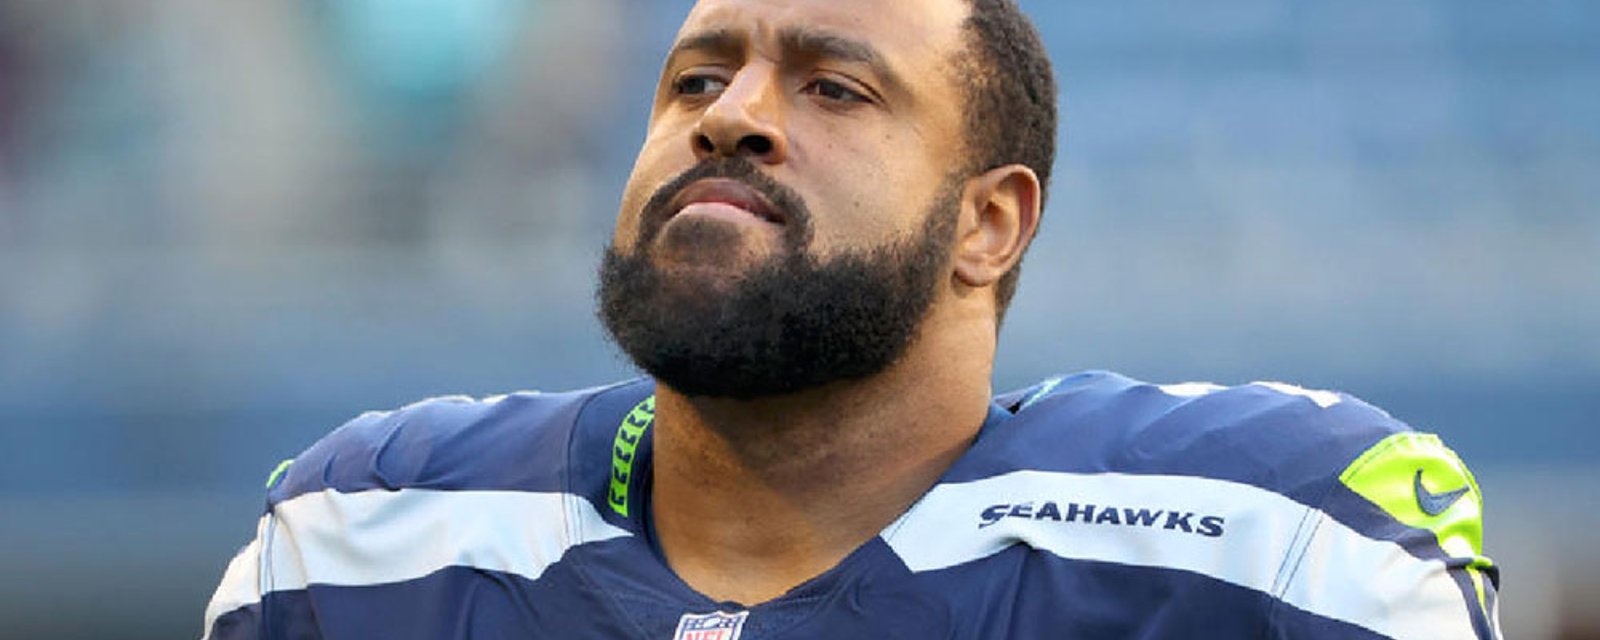 Free agent OT Duane Brown arrested at LAX on weapons charge 